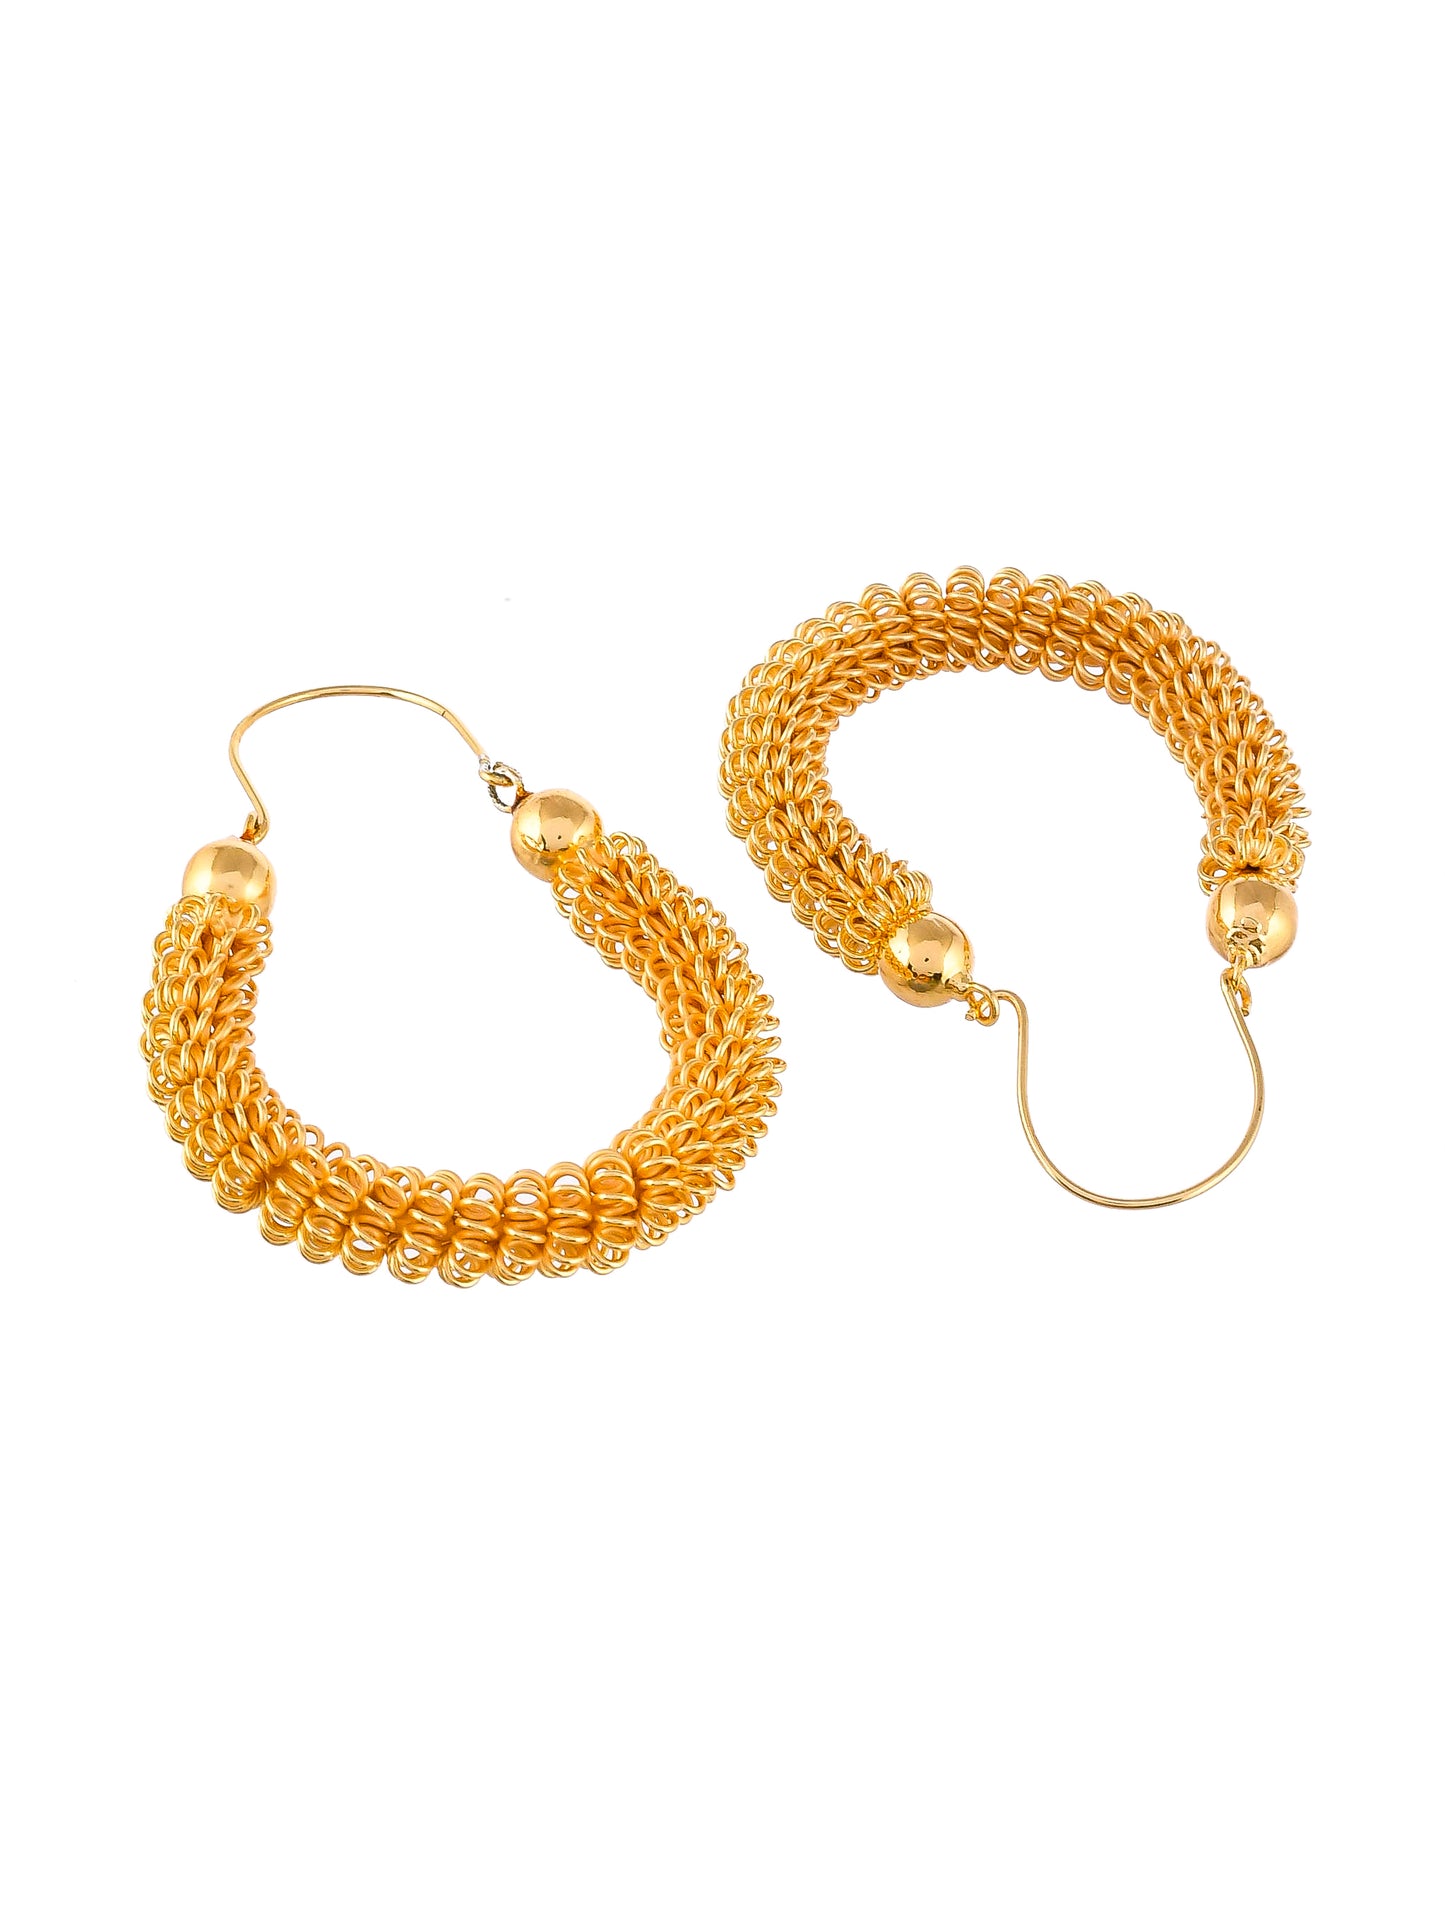 Gold Plated Spiral Earrings